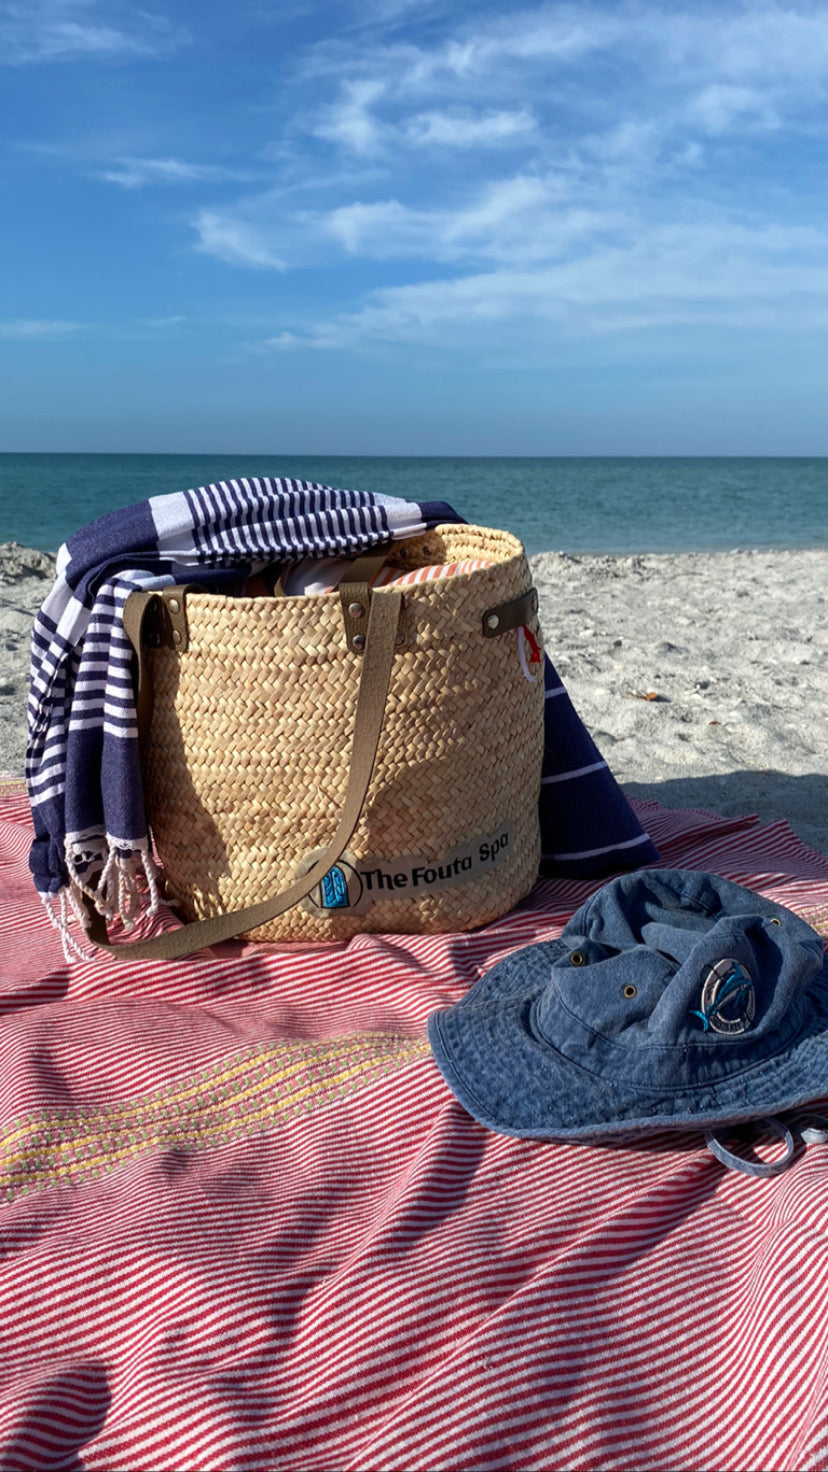 3 Reasons to Try Out a Fouta Towel